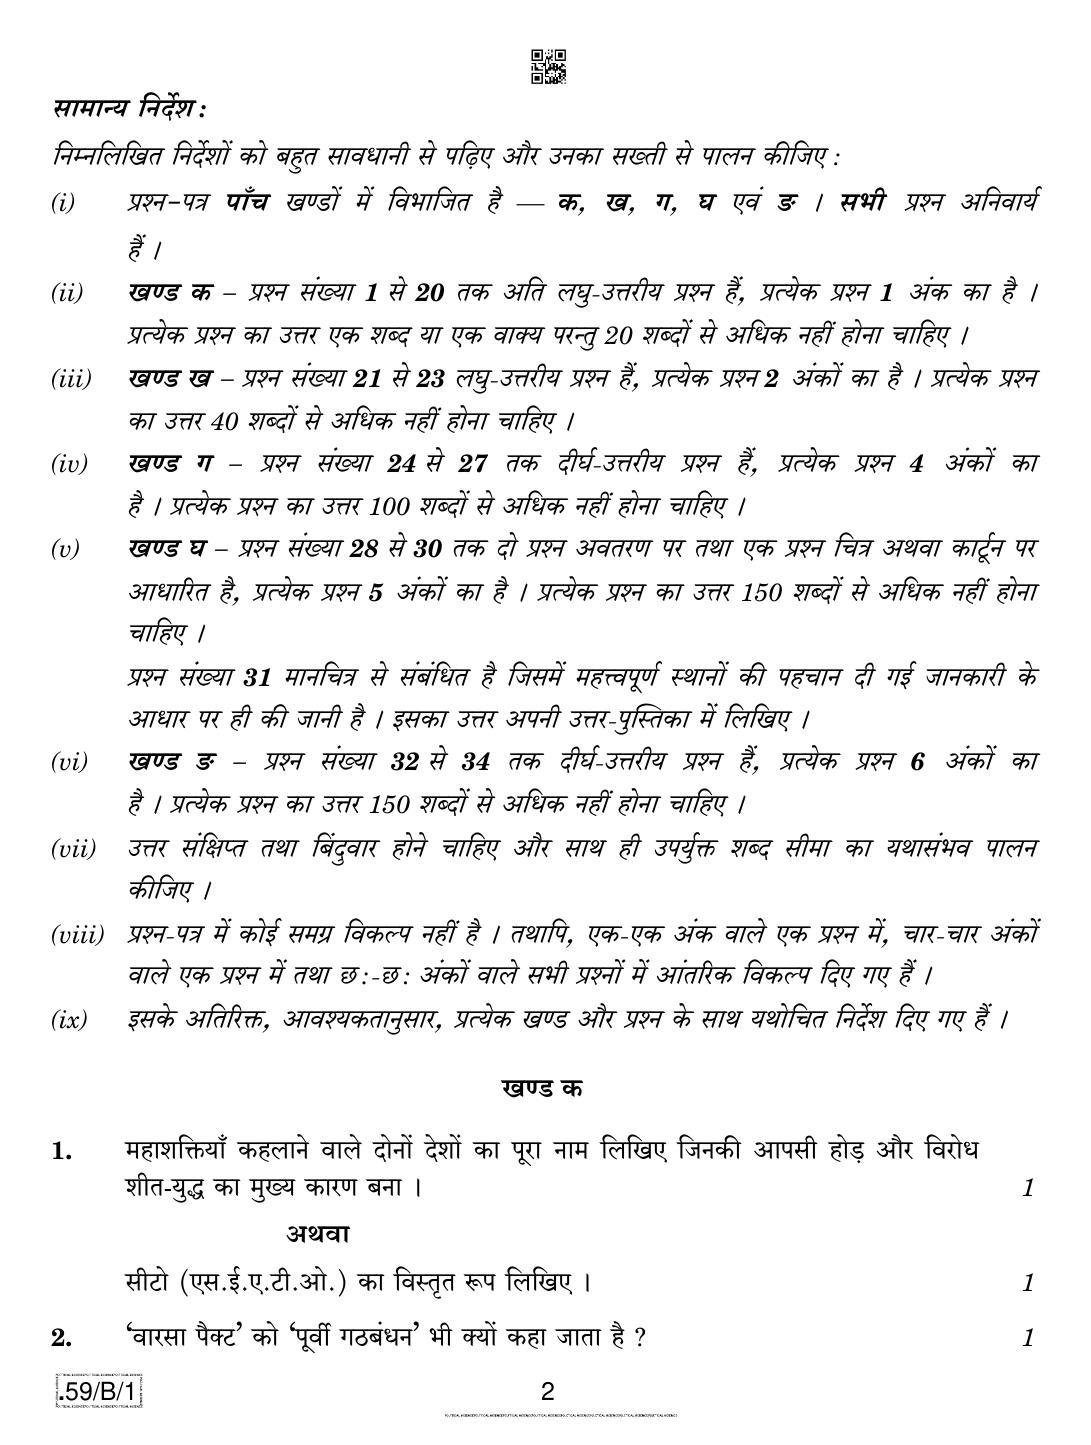 CBSE Class 12 59-C-1 - Political Science 2020 Compartment Question Paper - Page 2